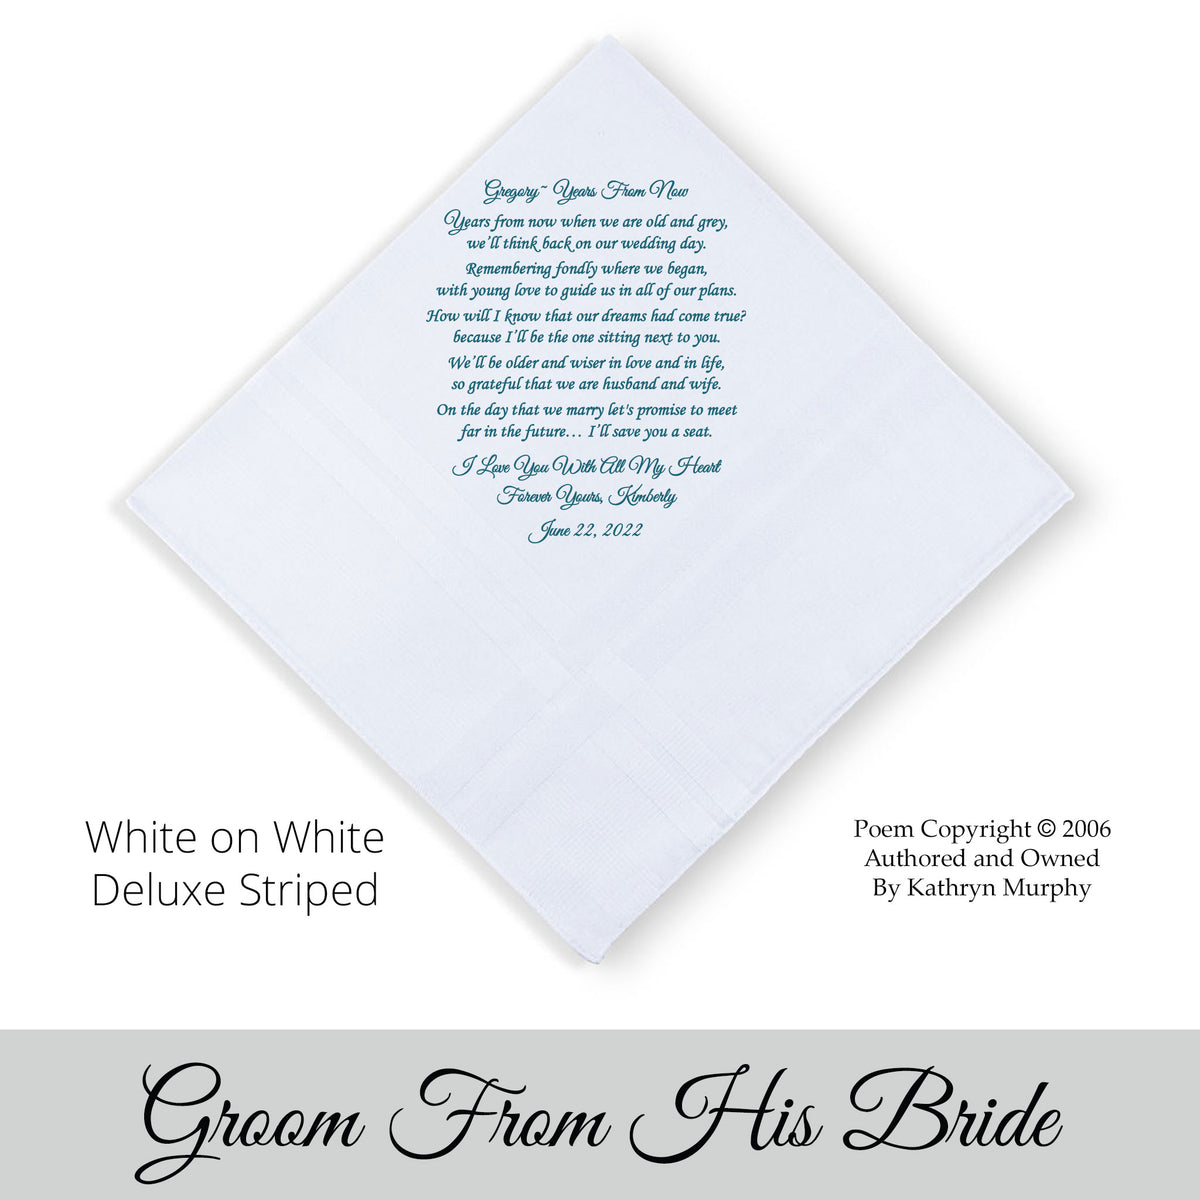 Gift for the Groom from his bride. wedding hankie with the poem Years from Now